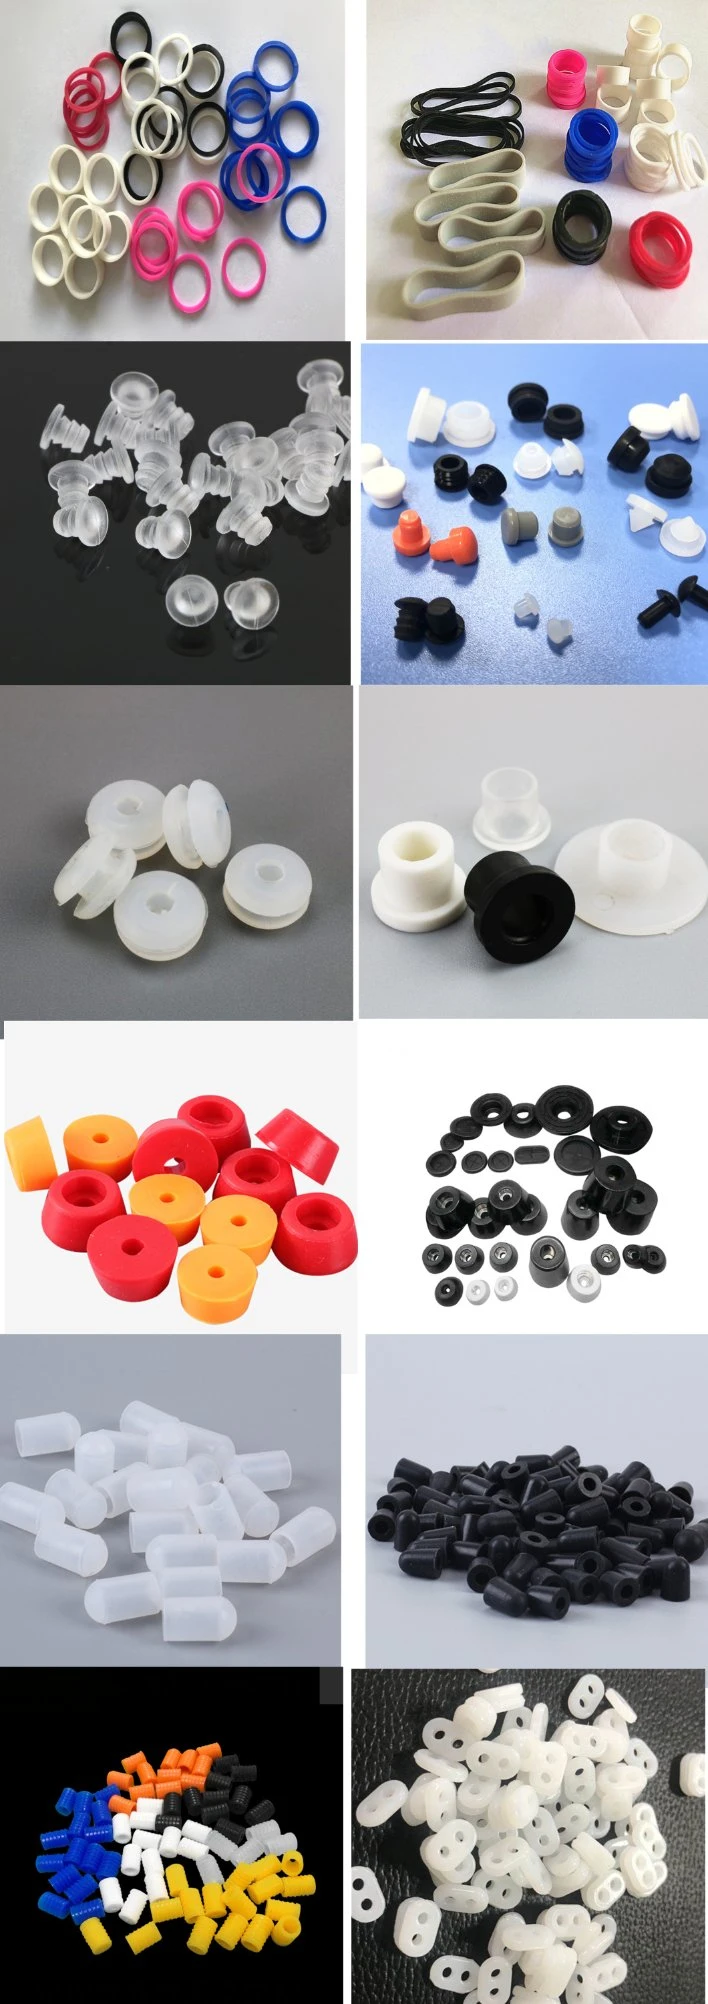 Dustproof Round/Tapered Rubber Grommet Plug Protective Silicone Stopper/Cap, Damper, Gasket for Sealing